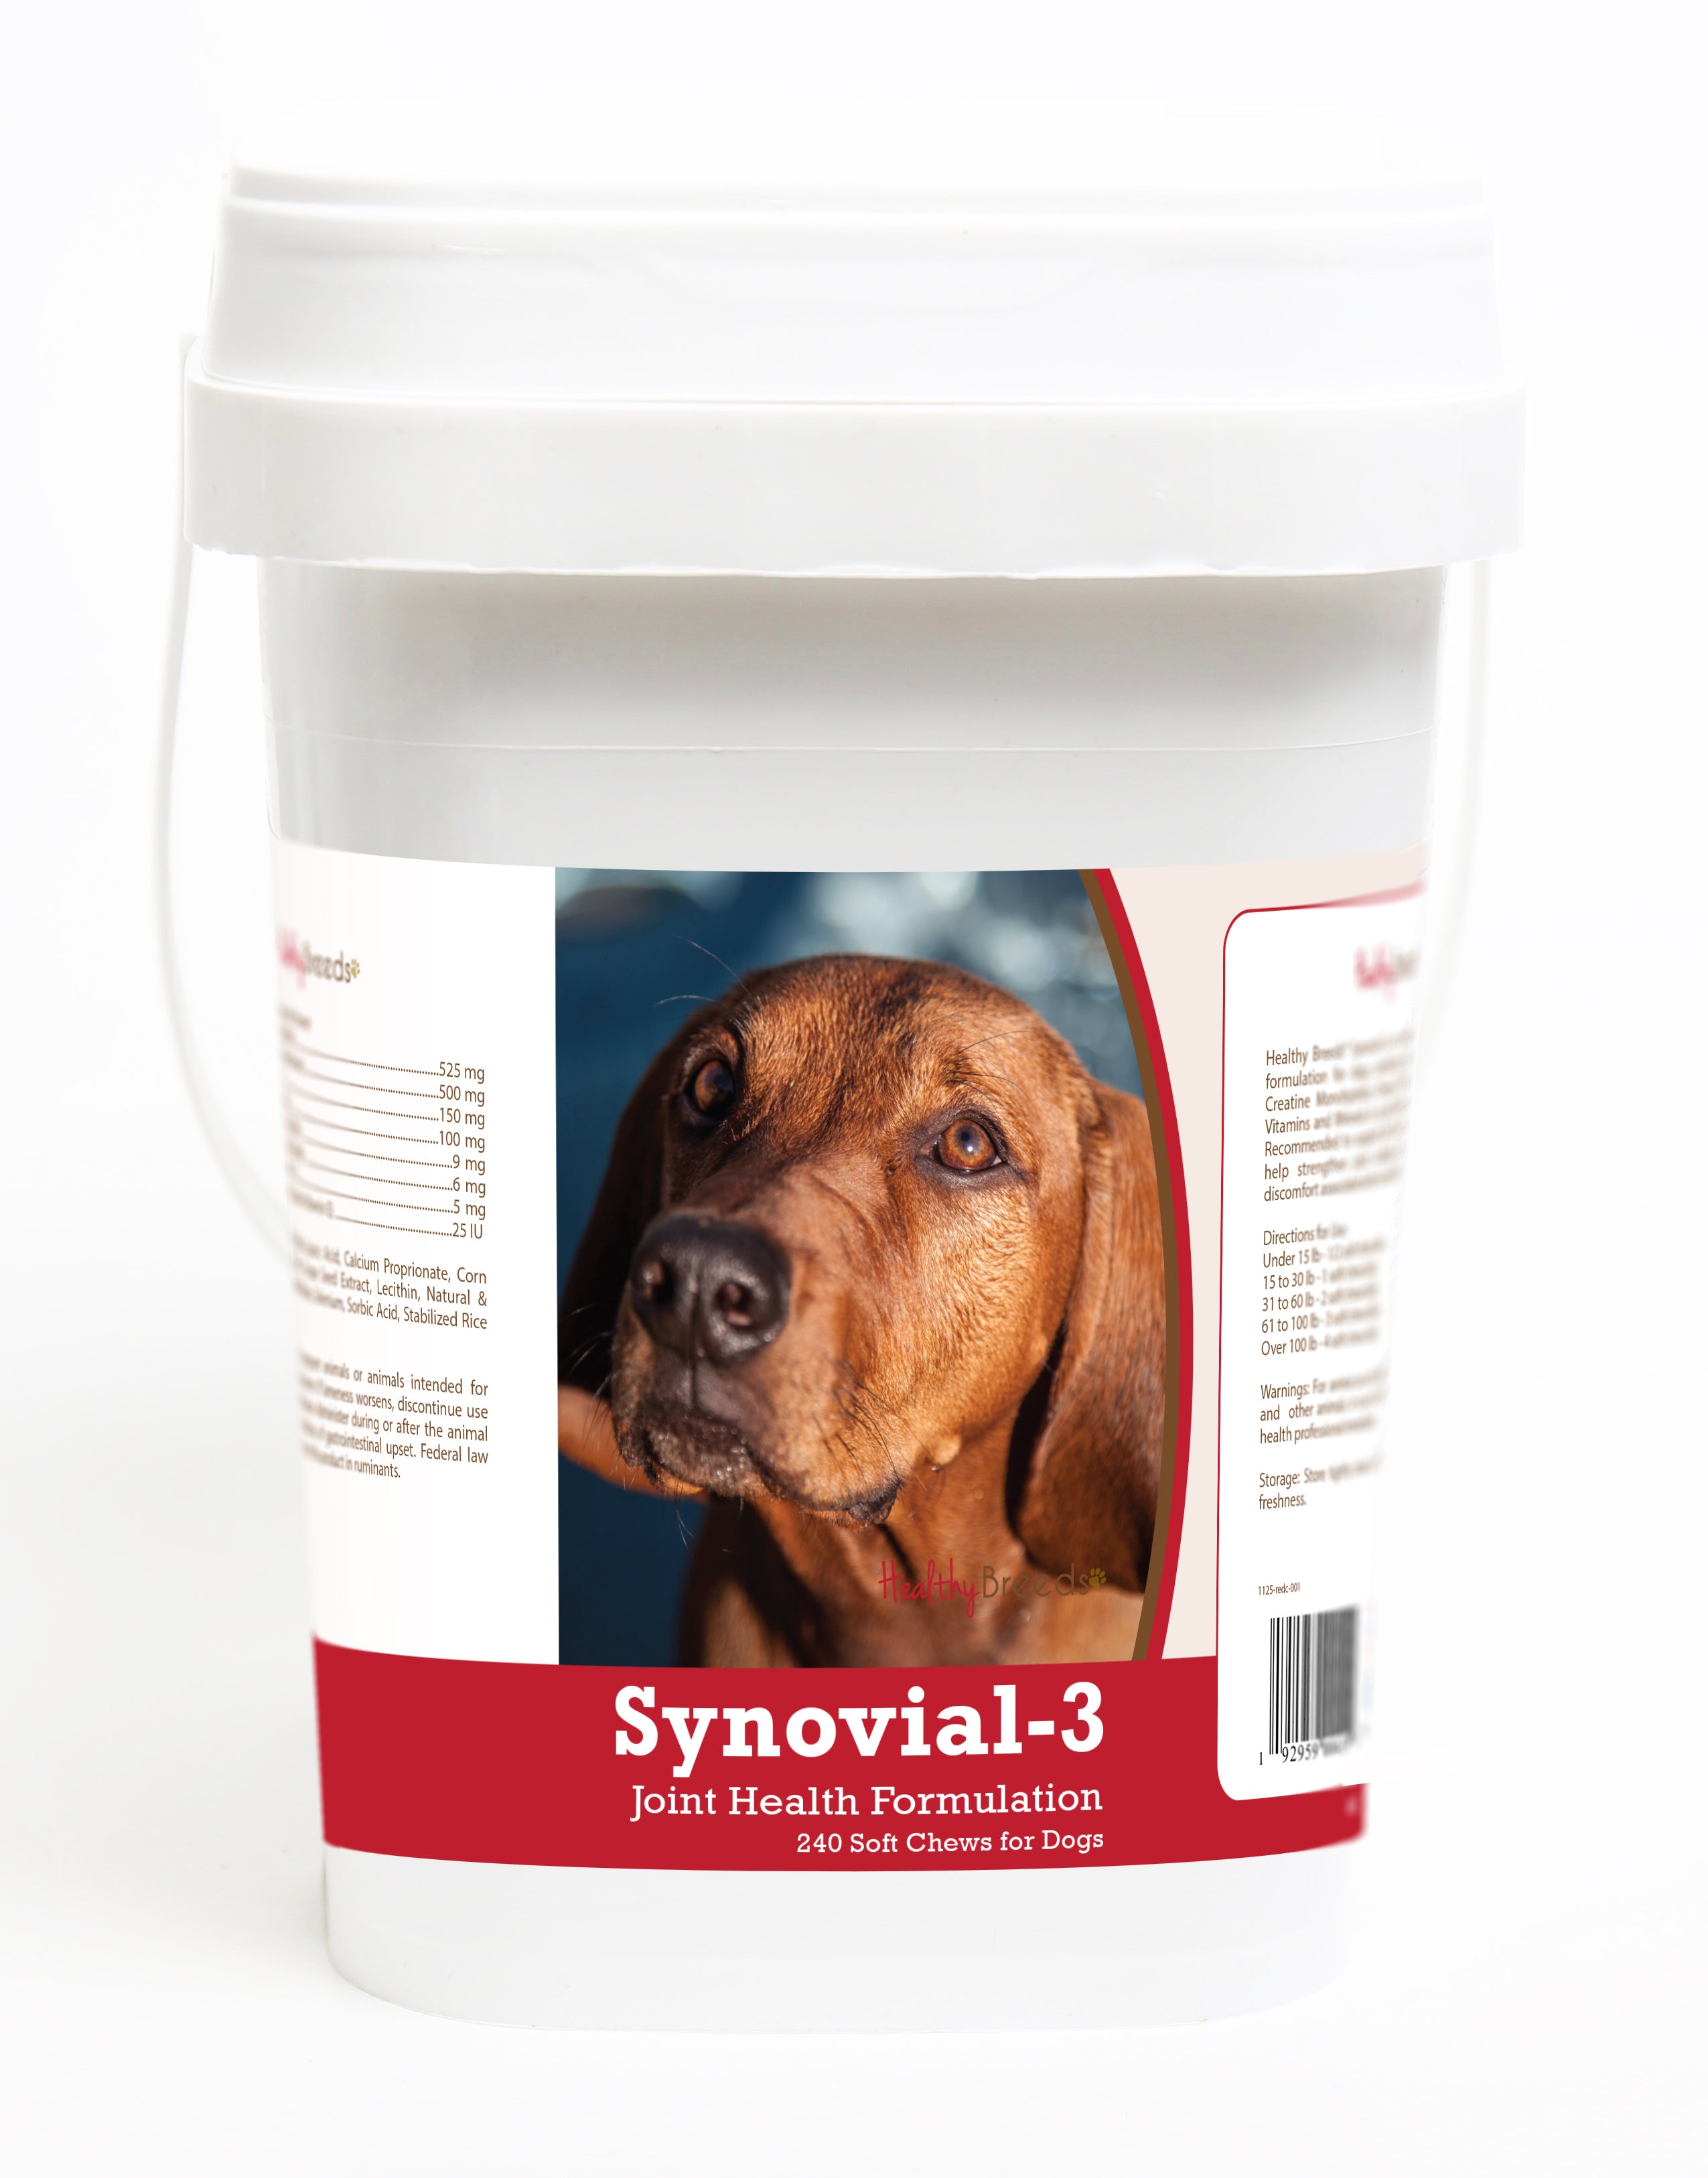 Redbone Coonhound Synovial-3 Joint Health Formulation Soft Chews 240 Count